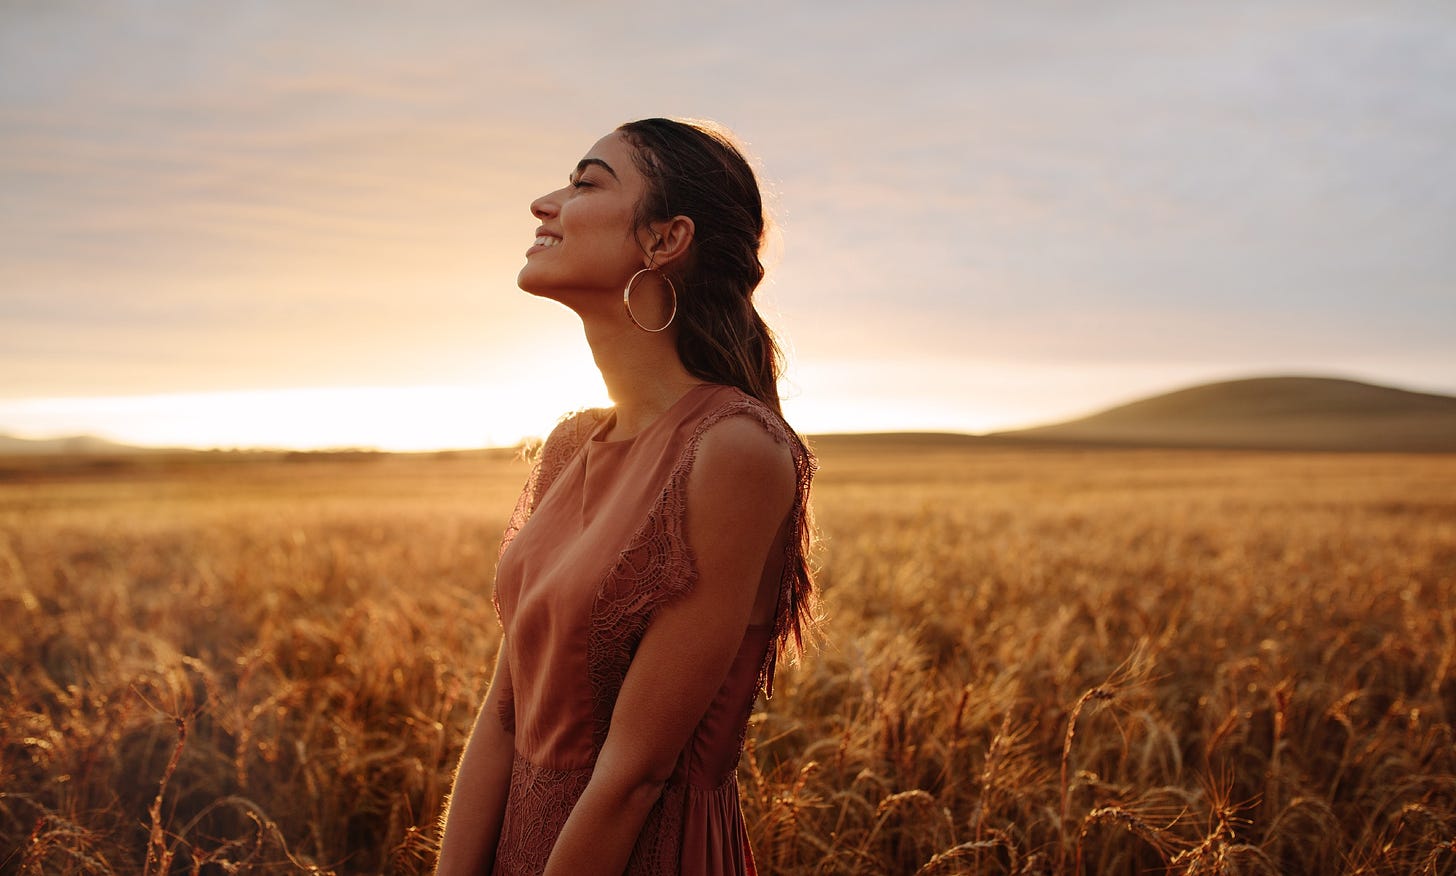 A woman with long dark hair smiles in a field as the sun sets.